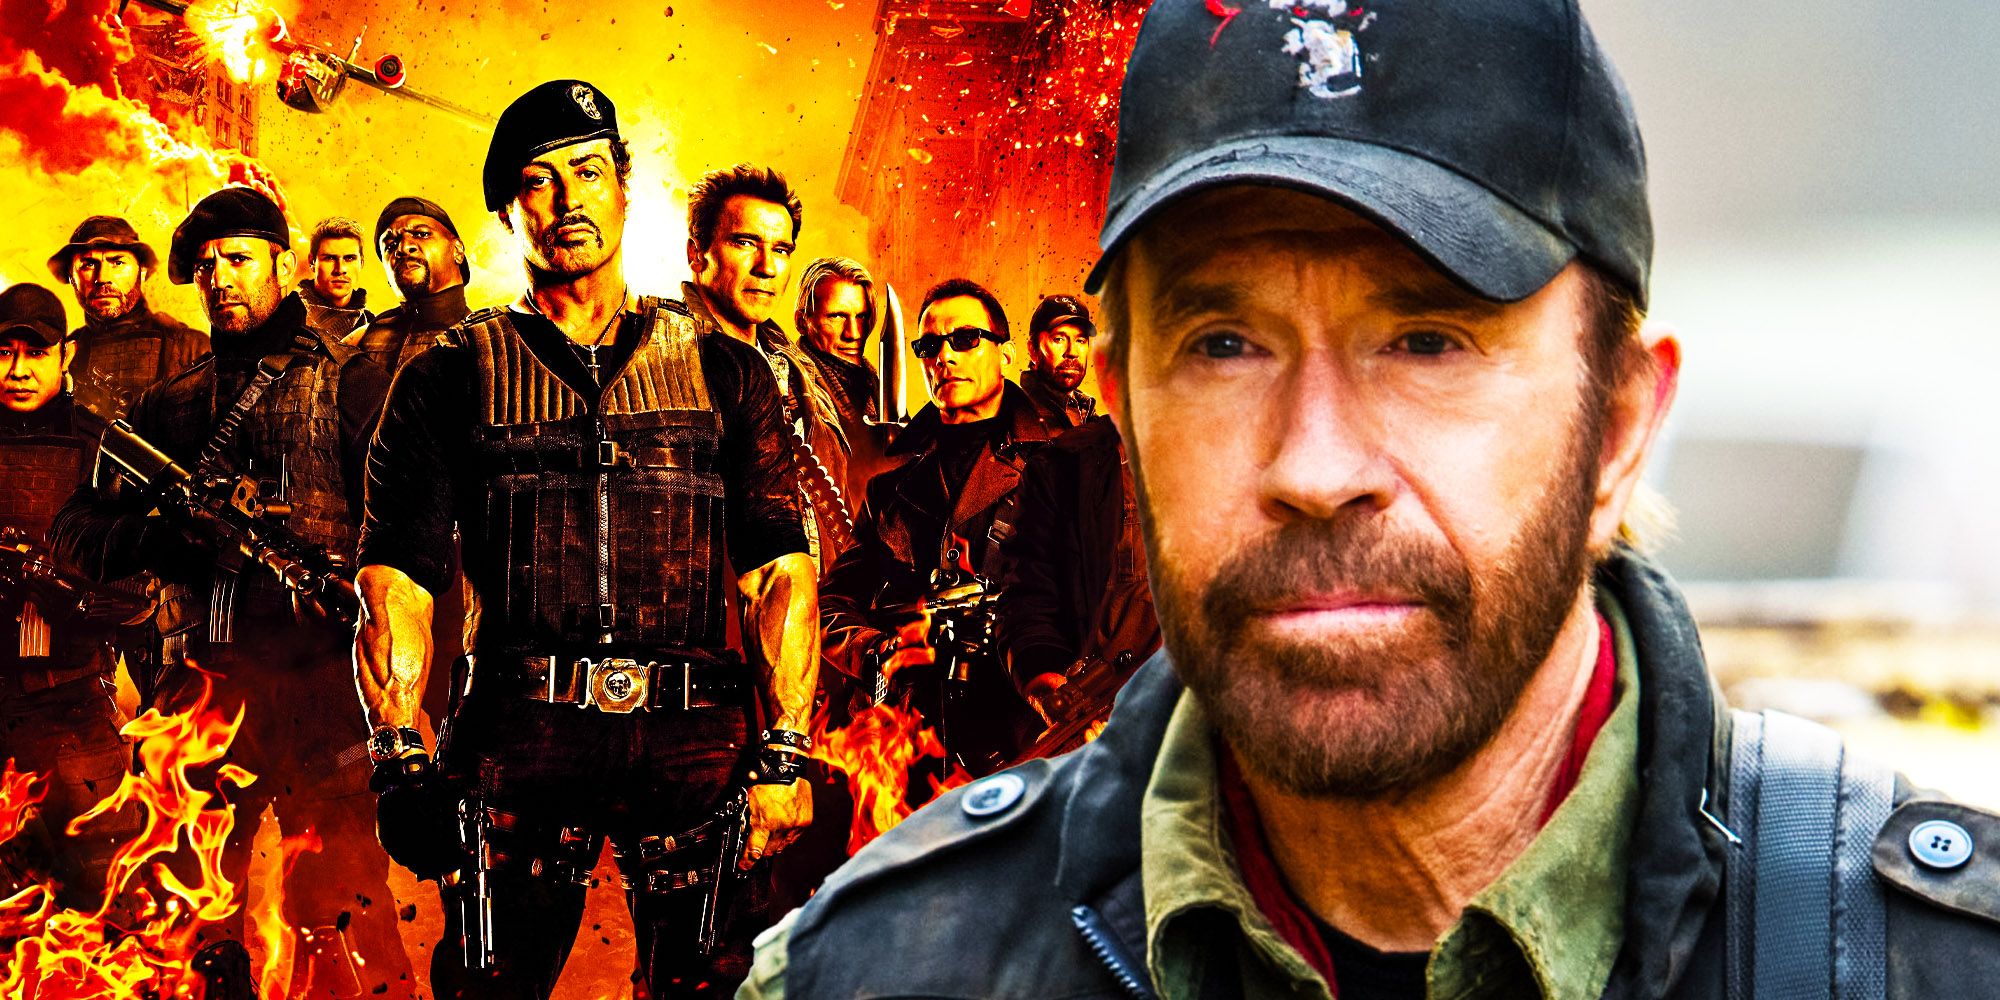 Collage of Chuck Norris and the Expendables cast